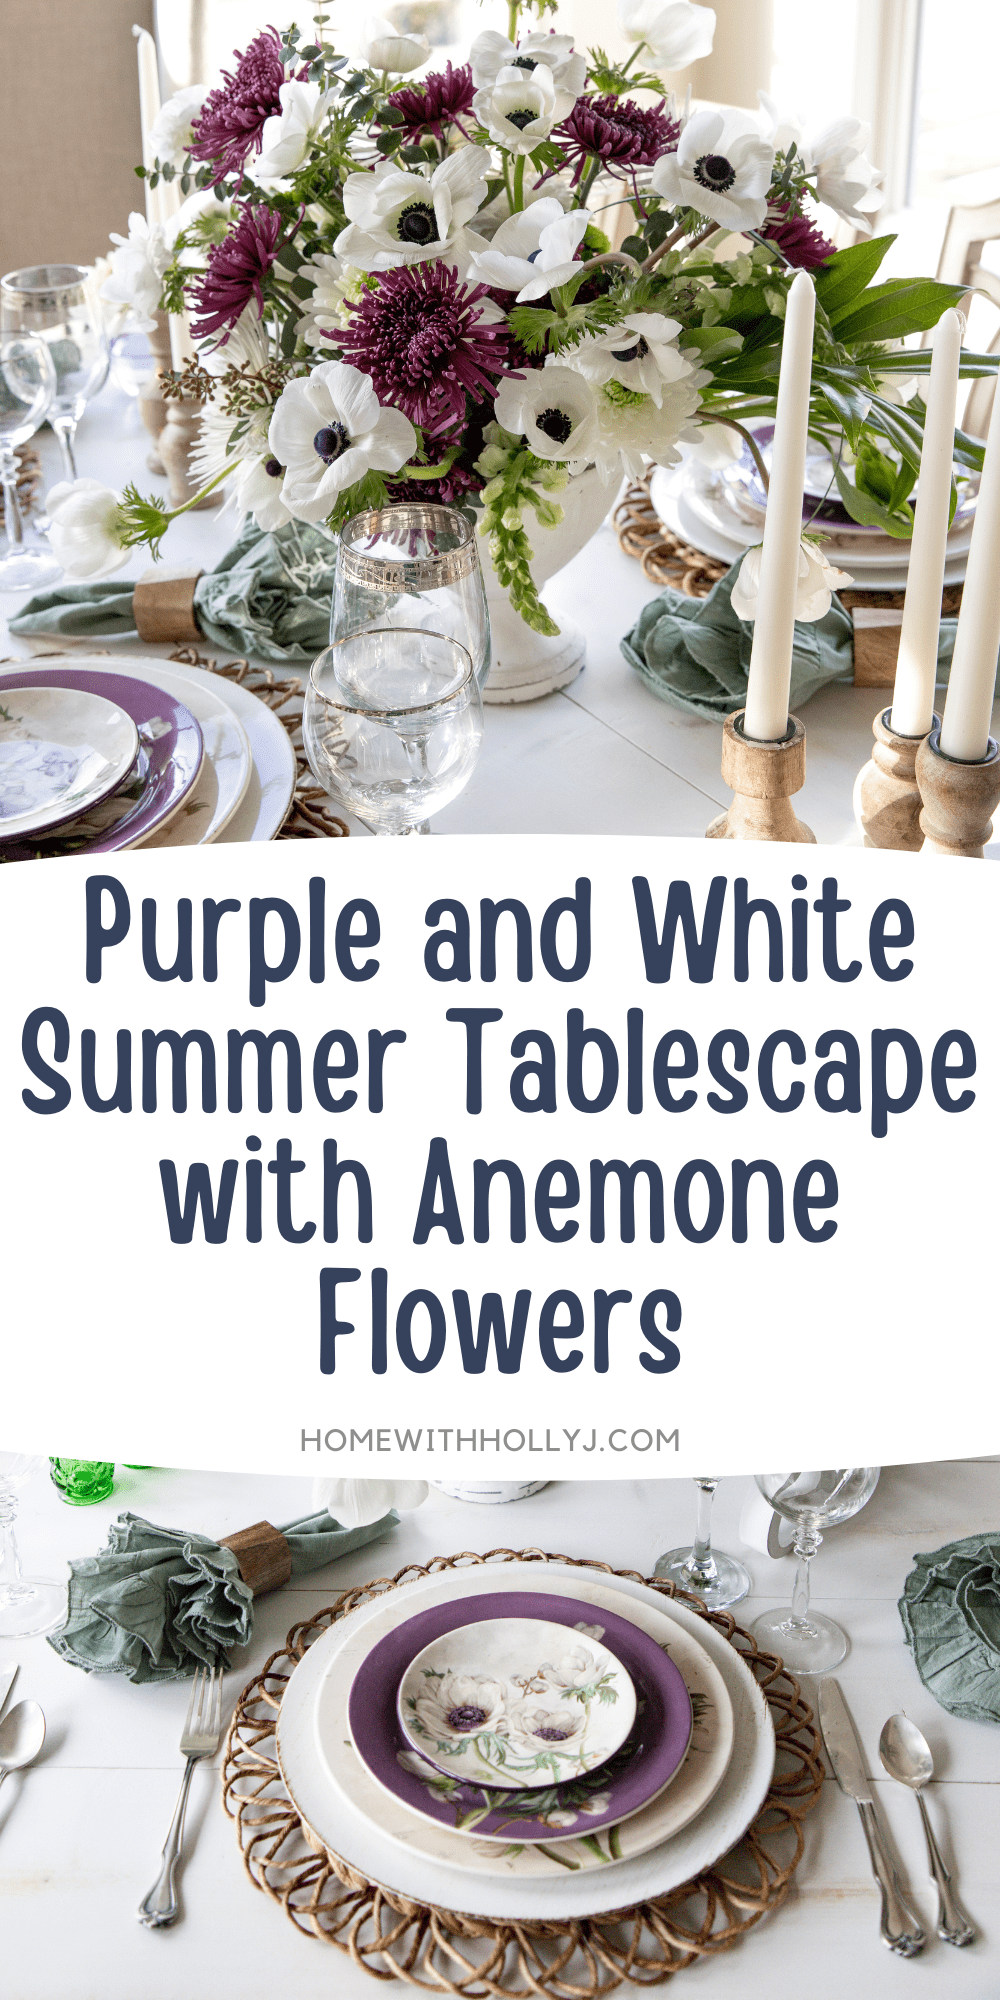 Create a stunning purple and white summer tablescape with anemone flowers that will liven up your table. Get all my best tips here.